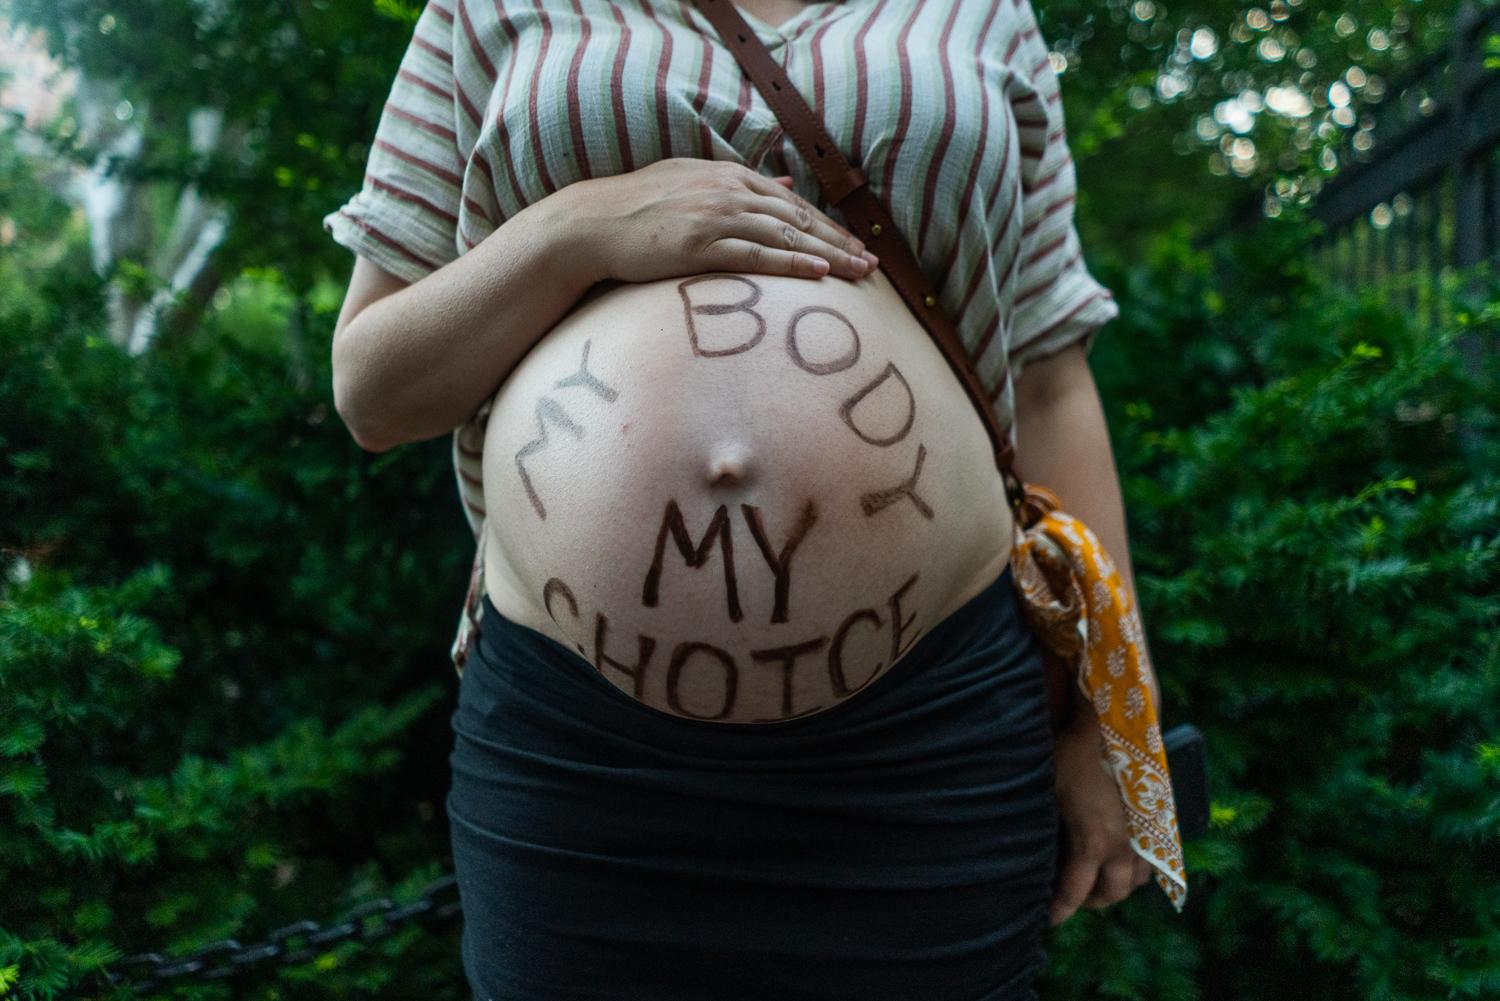 Roe v. Wade Protests - “My body, my choice” appears on a pregnant...